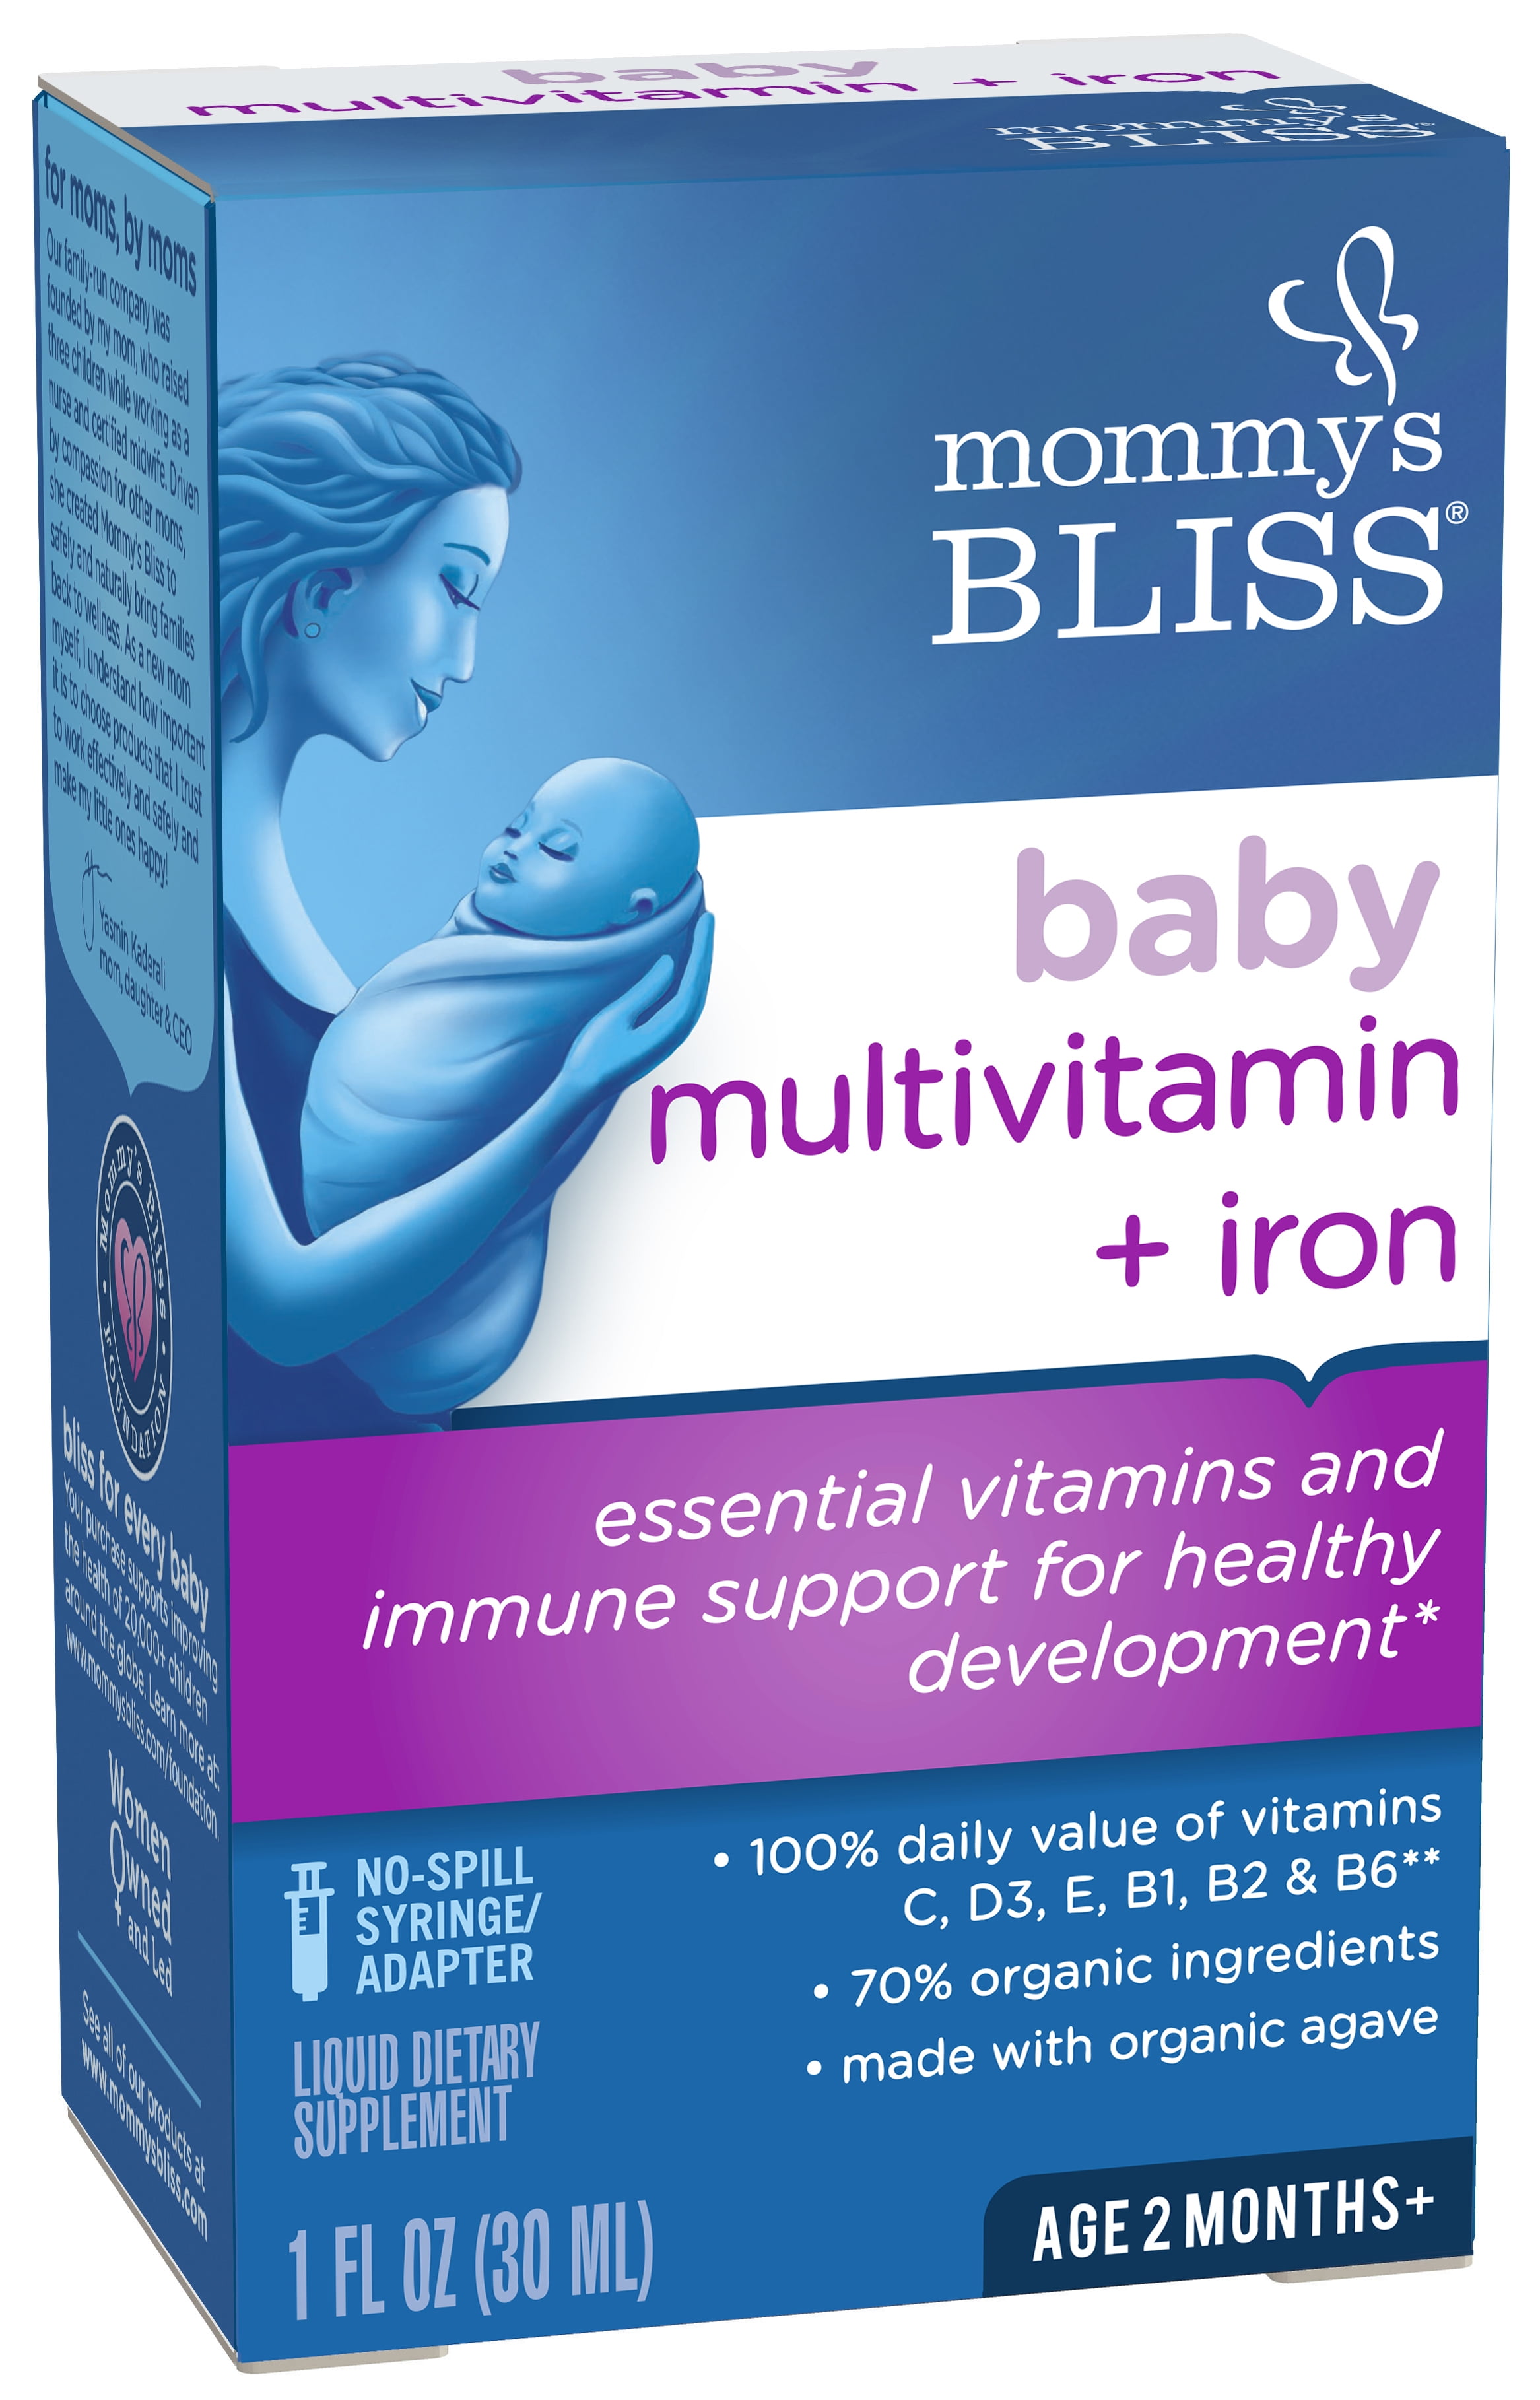 Mommy's Bliss Baby Multivitamin and Iron Supplements, Grape Flavor, 30 ml